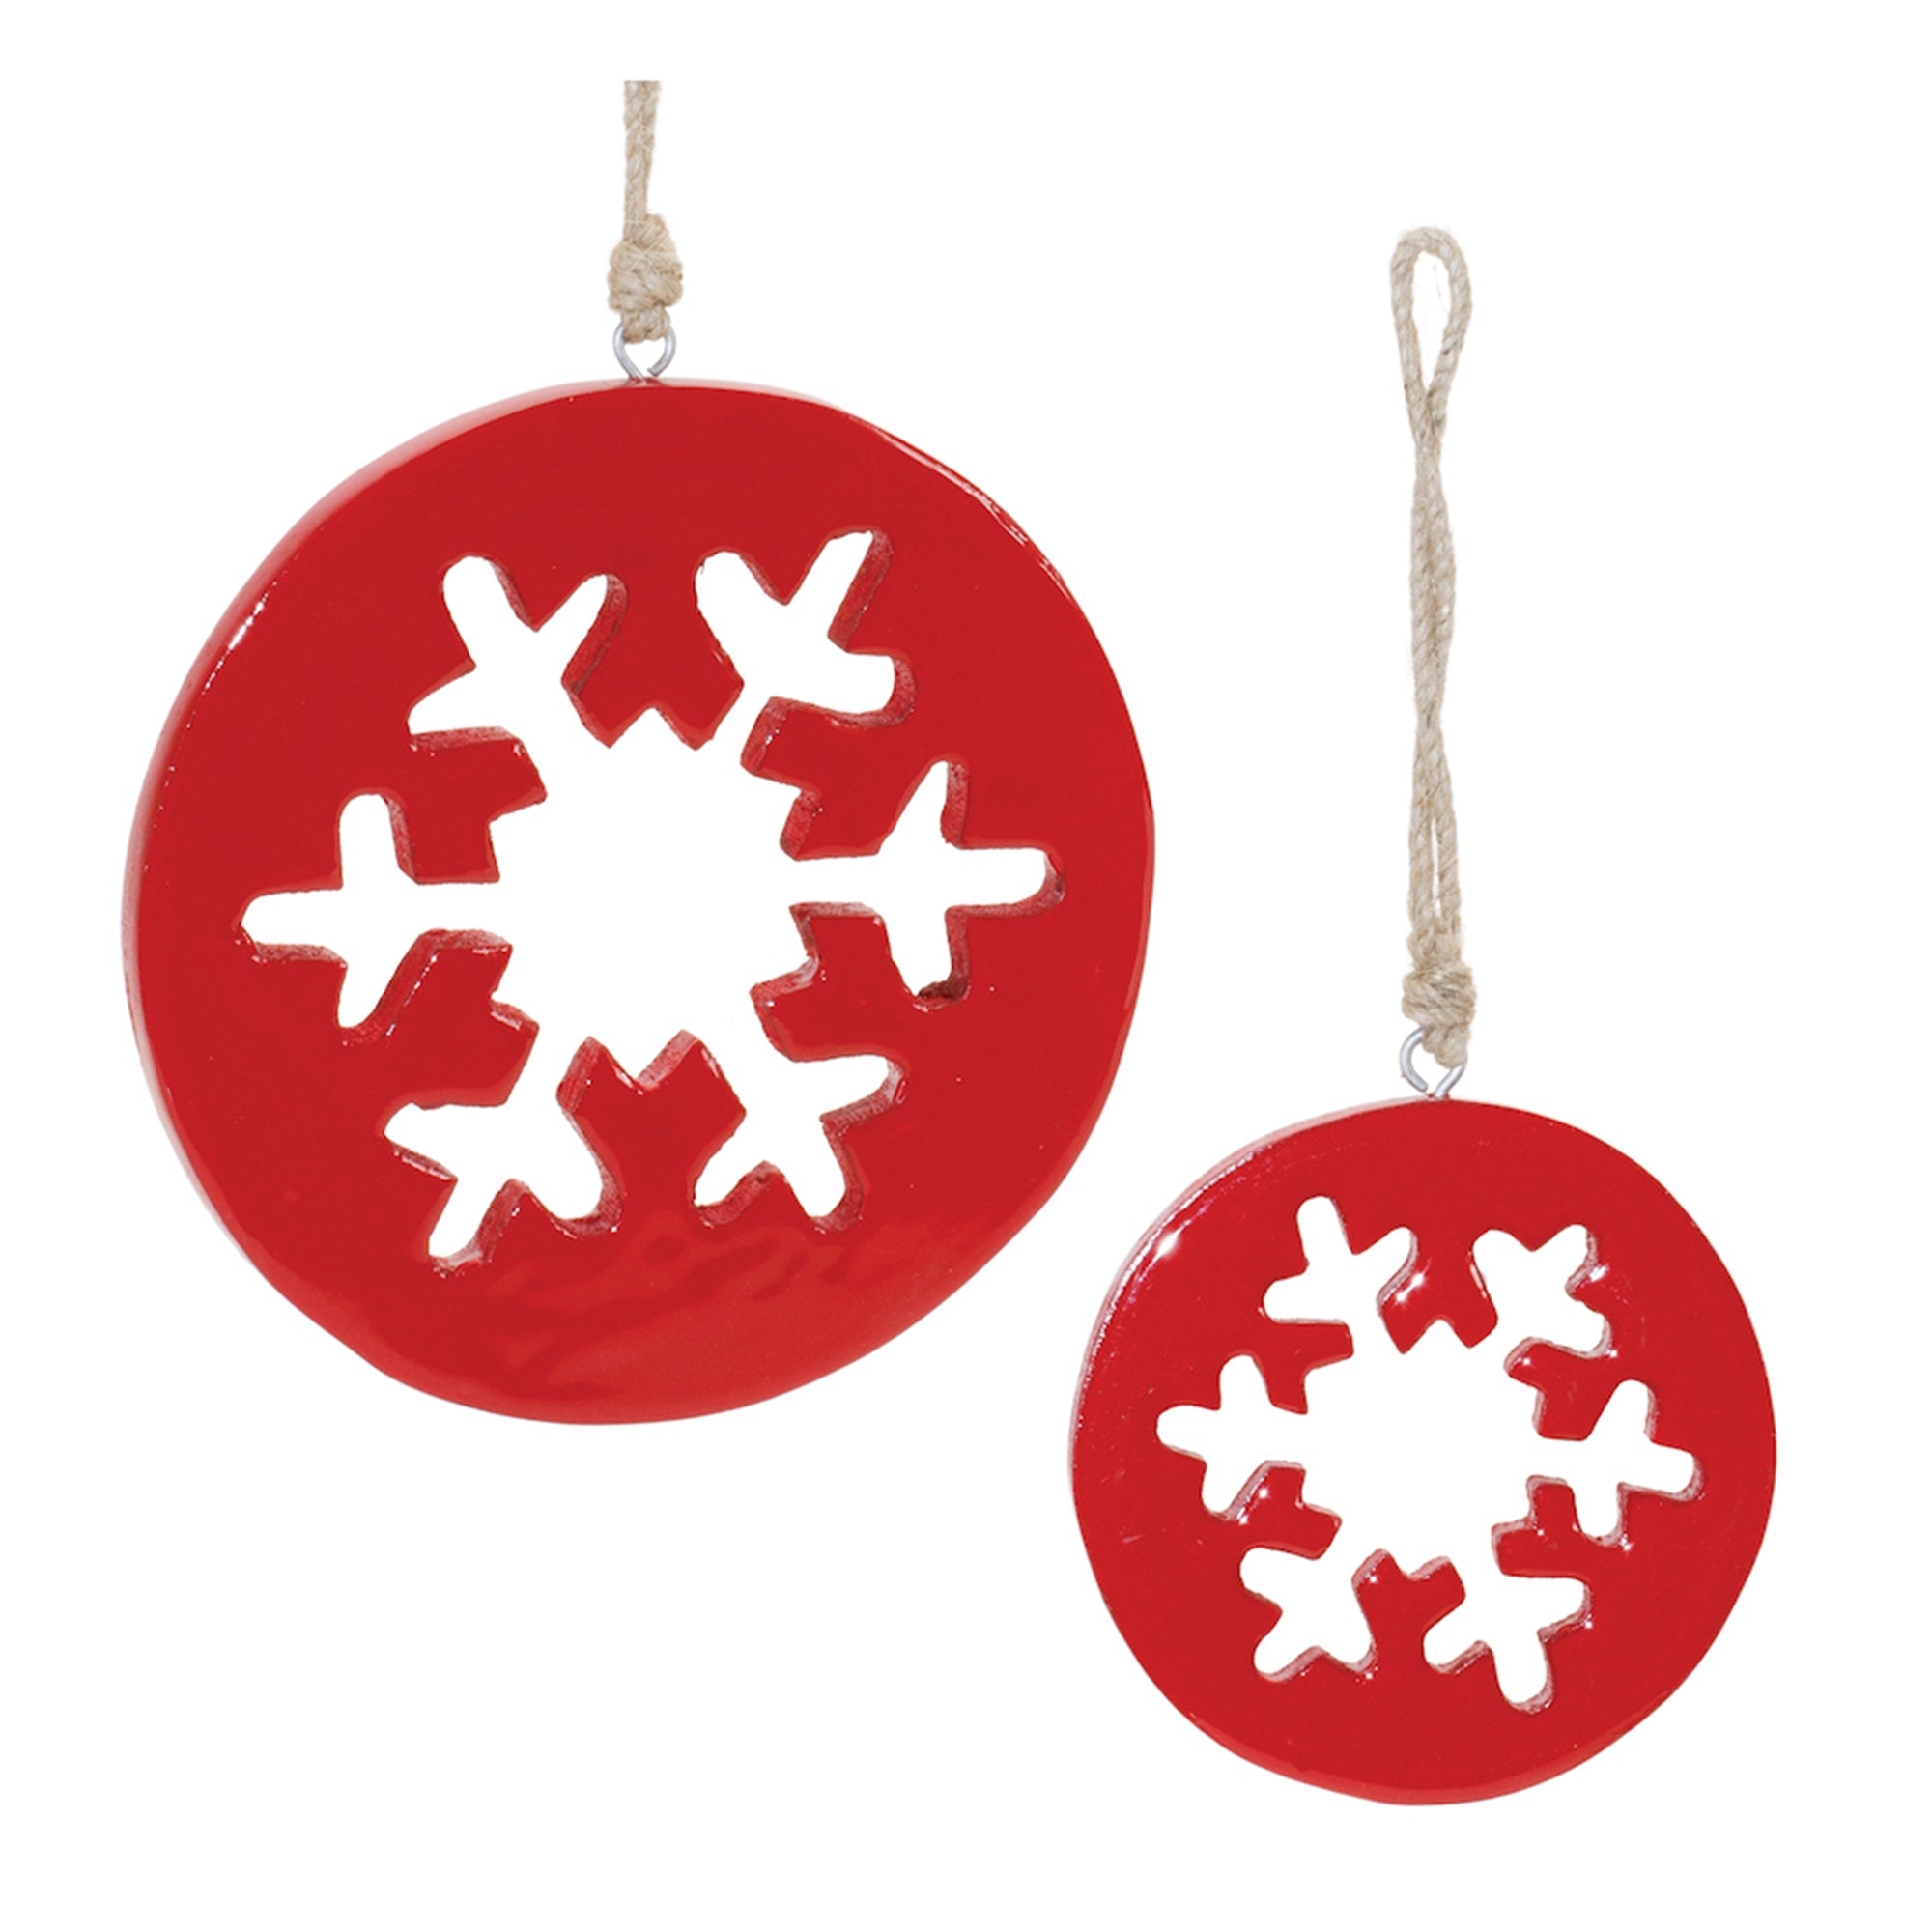 Red Wood Snowflake Cut-Out Ornament (Set of 12)